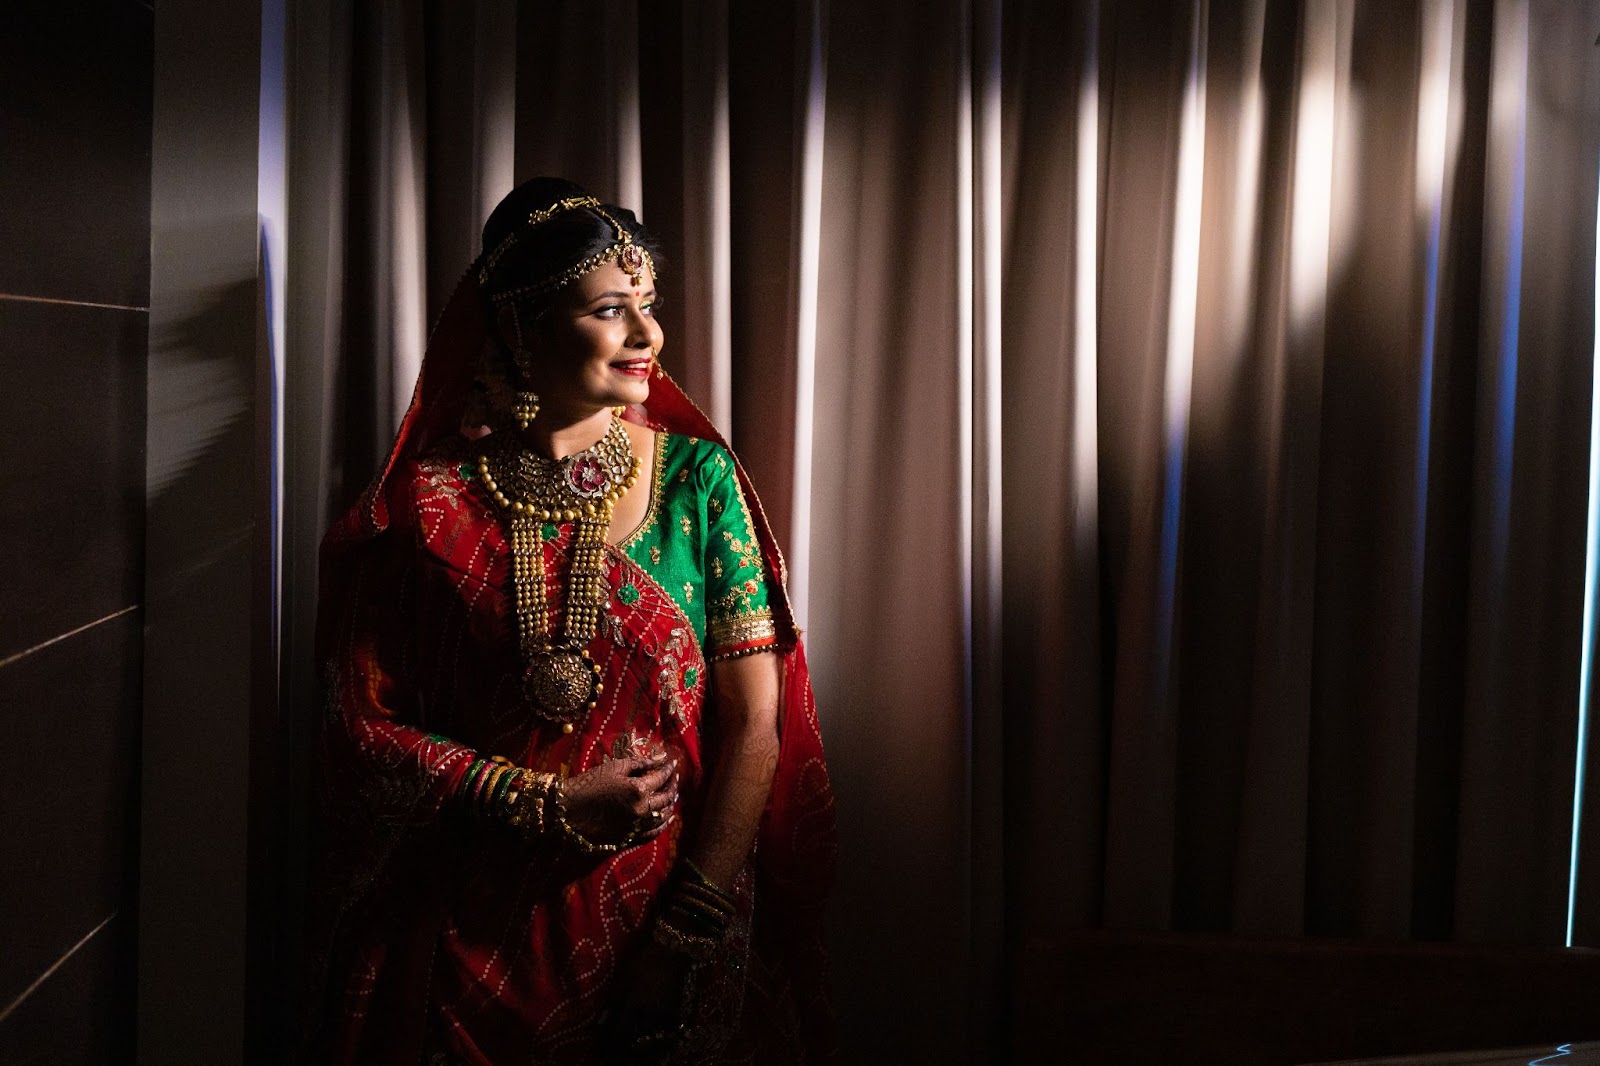 Experienced photographer Indore for classic wedding photography - Harsh Studio Photography 